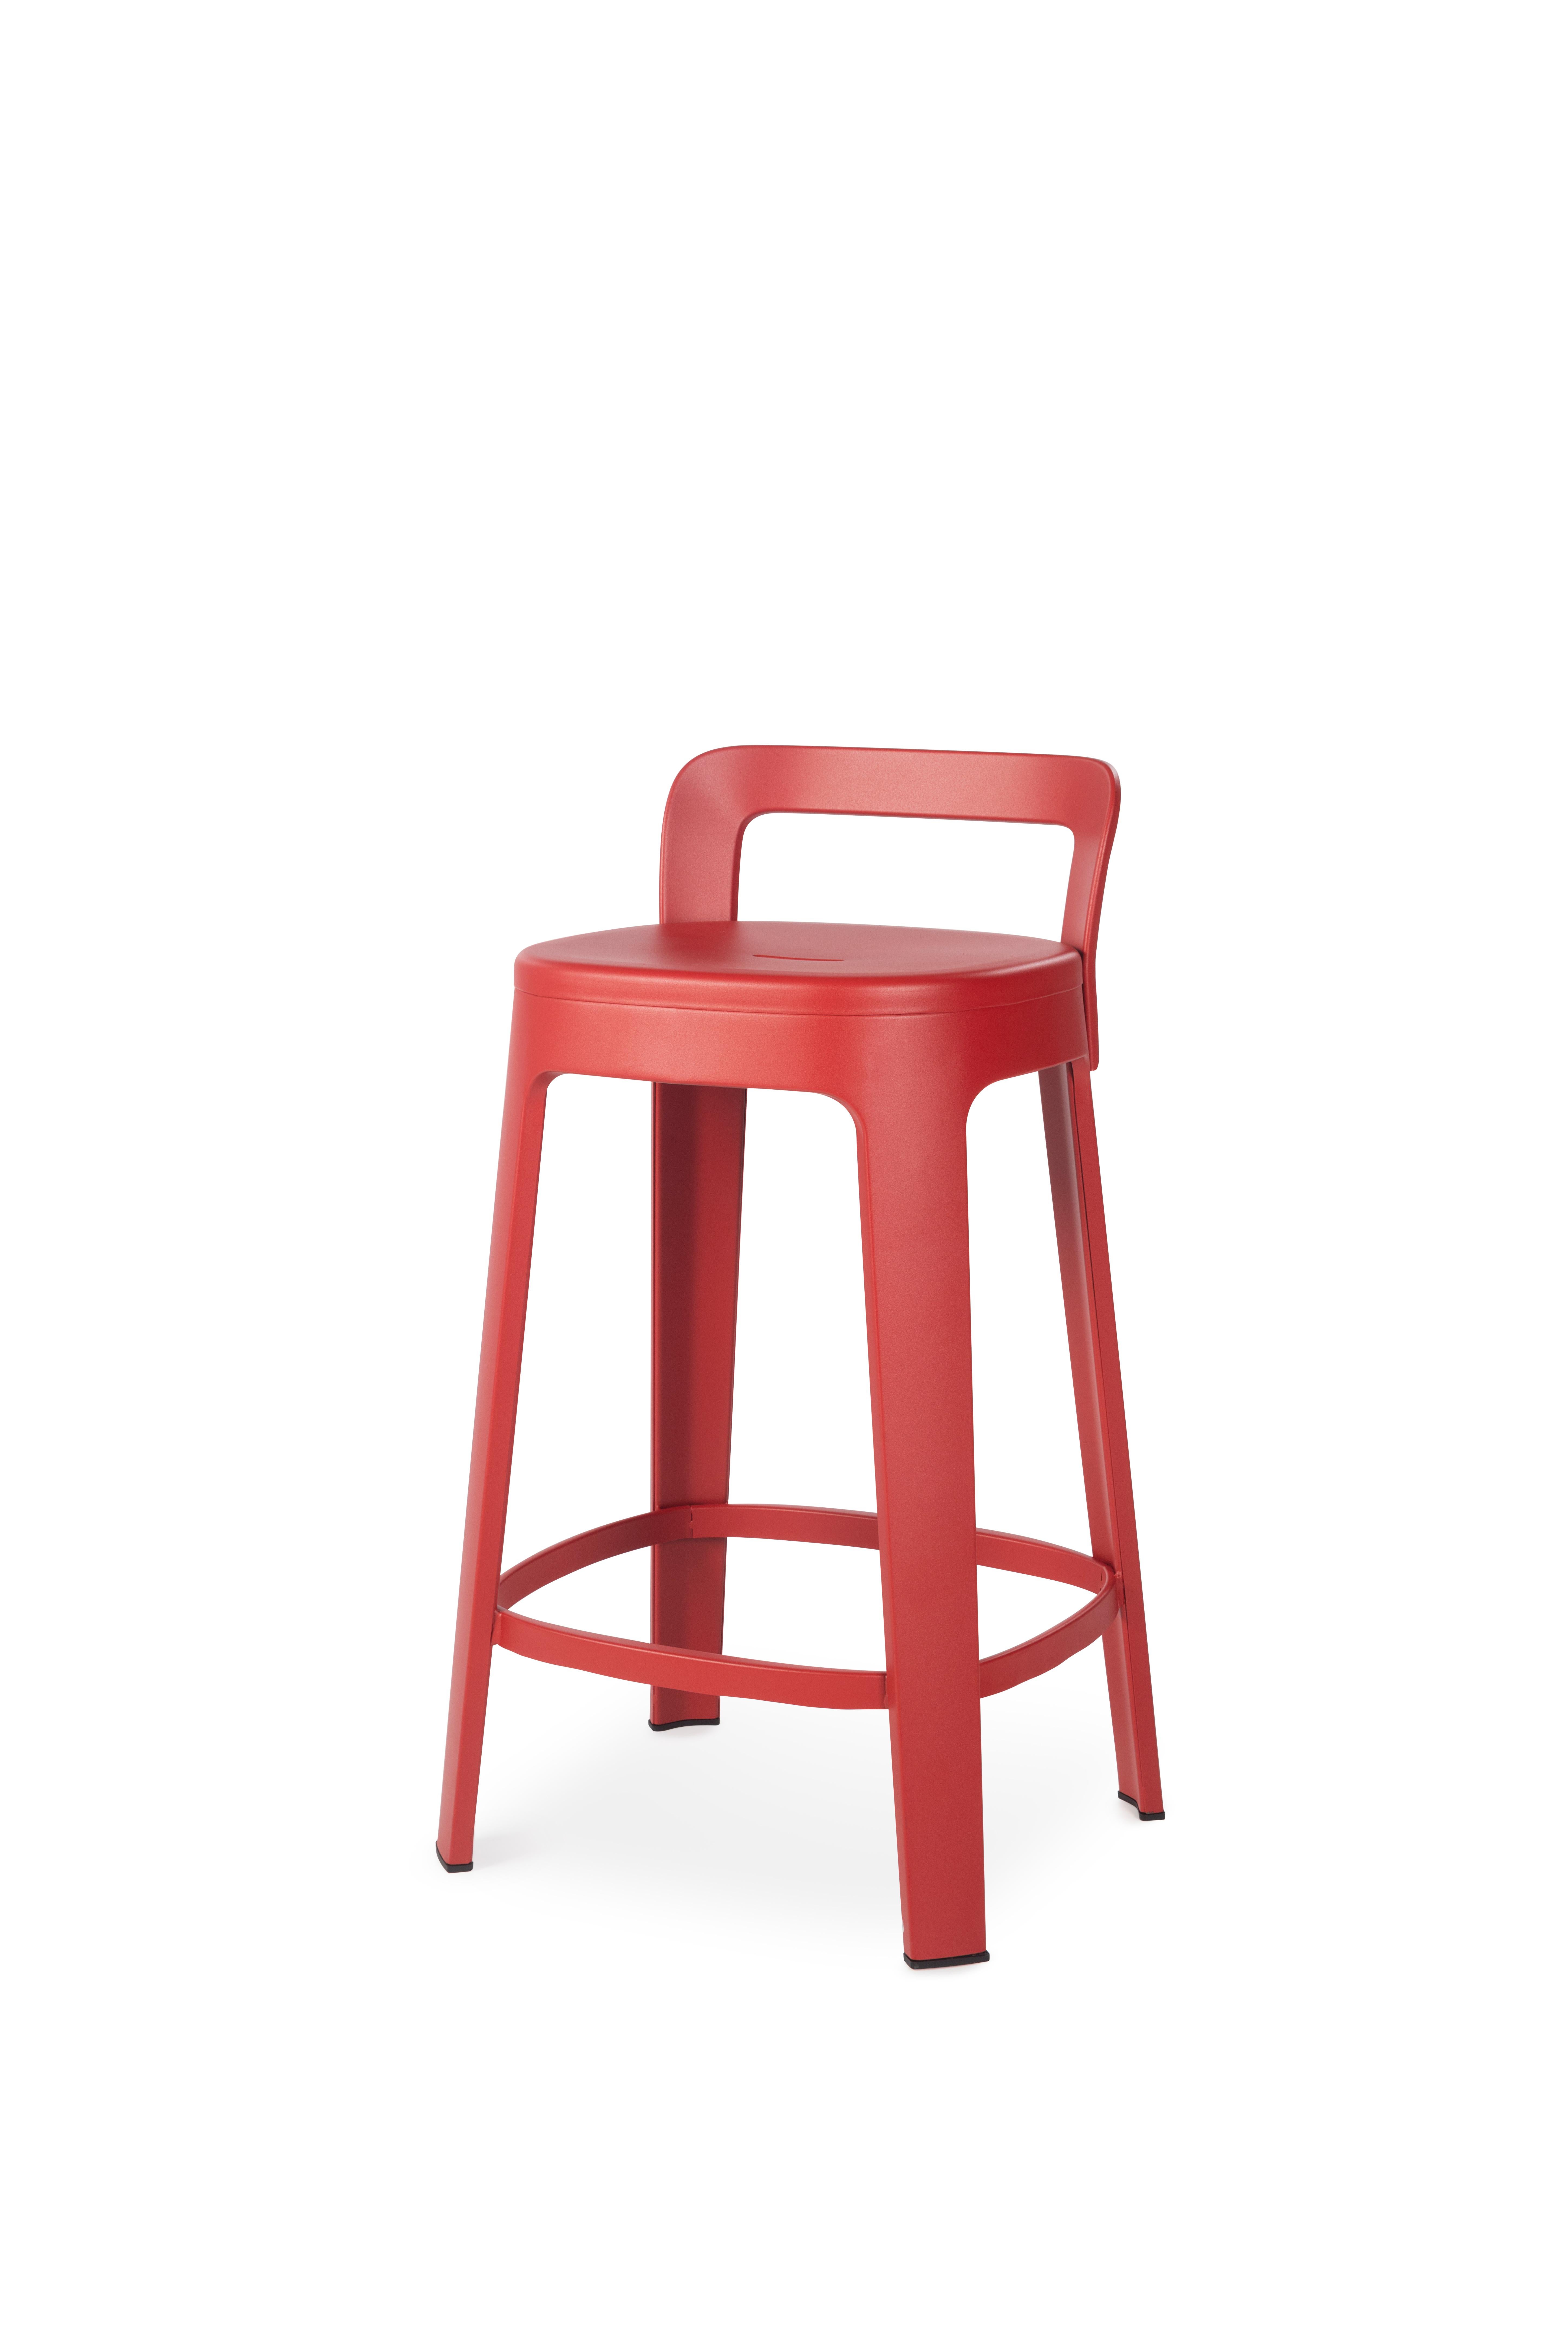 The Ombra stool has a clean design, with sleek, elegant lines; its comfortable, generously sized ergonomic seat; its range of eye-catching and easy-to-match colours; its different heights to suit all sorts of tables and bars. Ombra is designed and